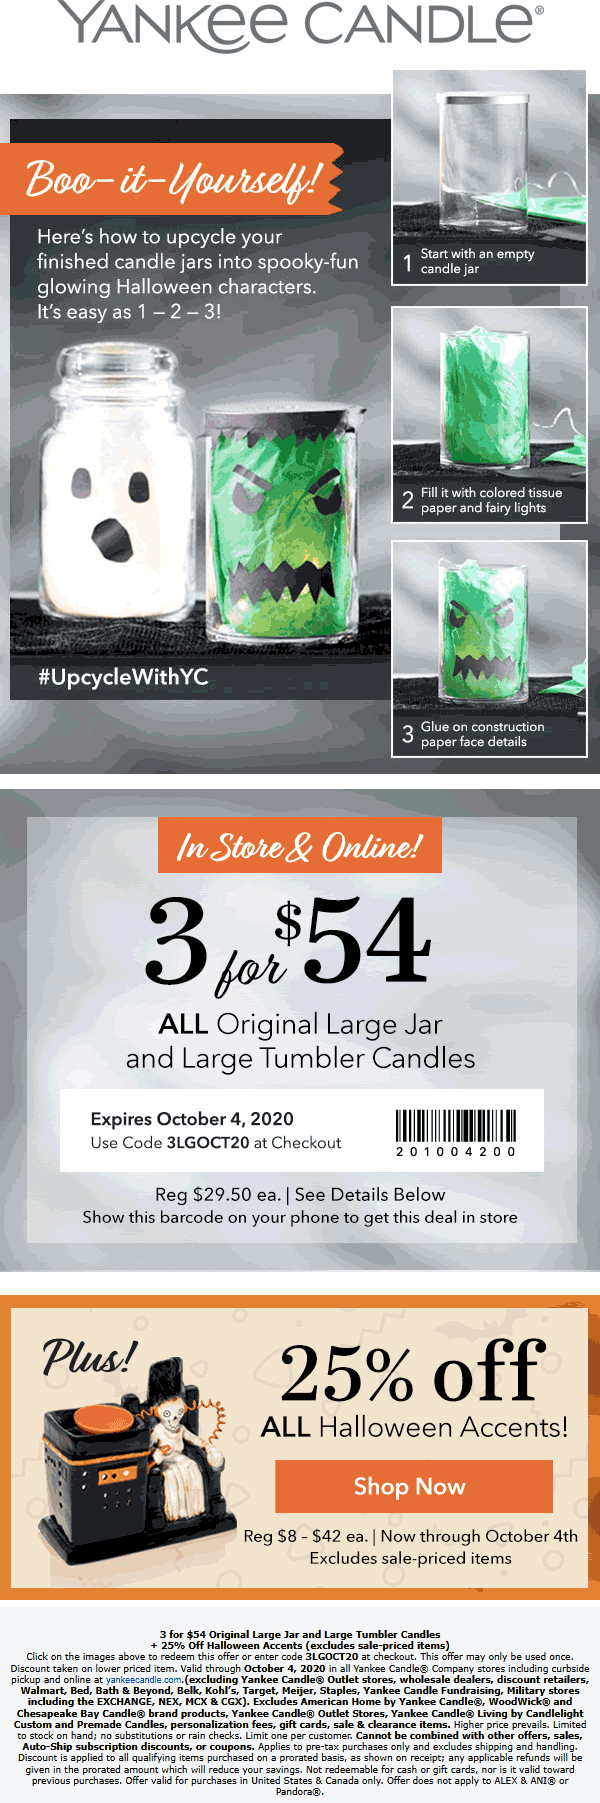 Yankee Candle stores Coupon  3 large tumbler candles for $54 at Yankee Candle, or online via promo code 3LGOCT20 #yankeecandle 